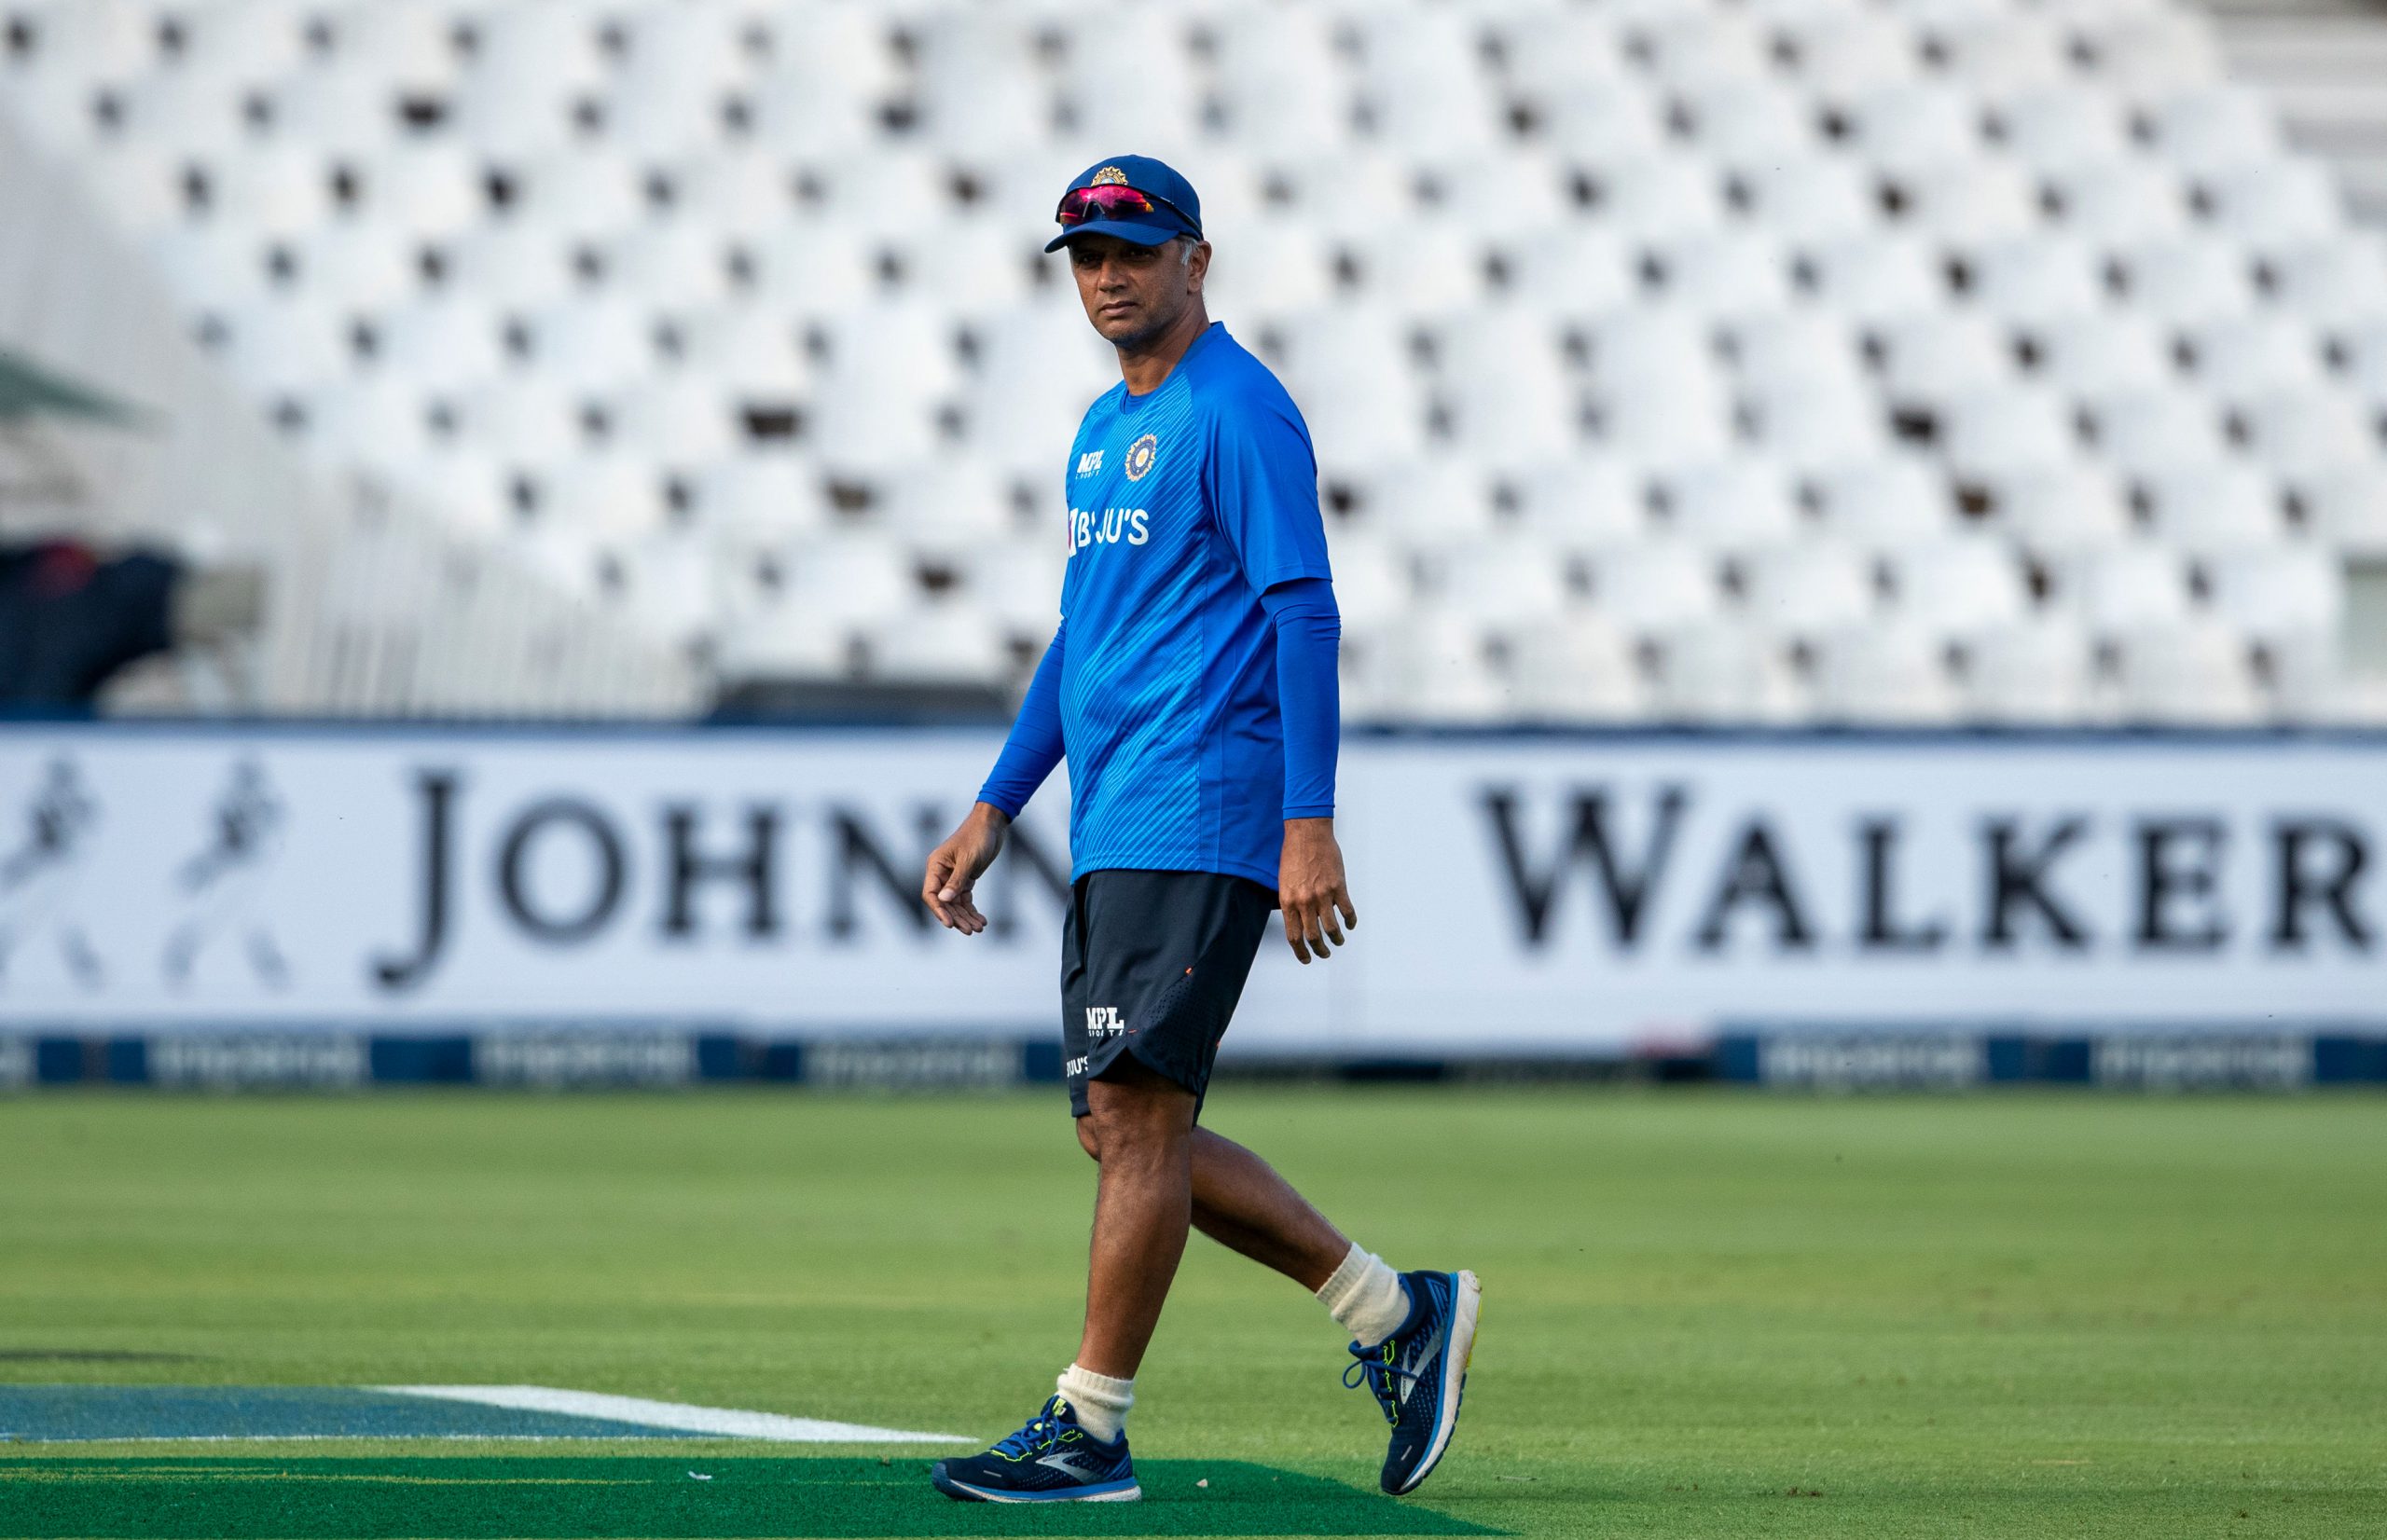 India vs Pakistan in Asia Cup 2022: Rahul Dravid recovers from COVID, joins team